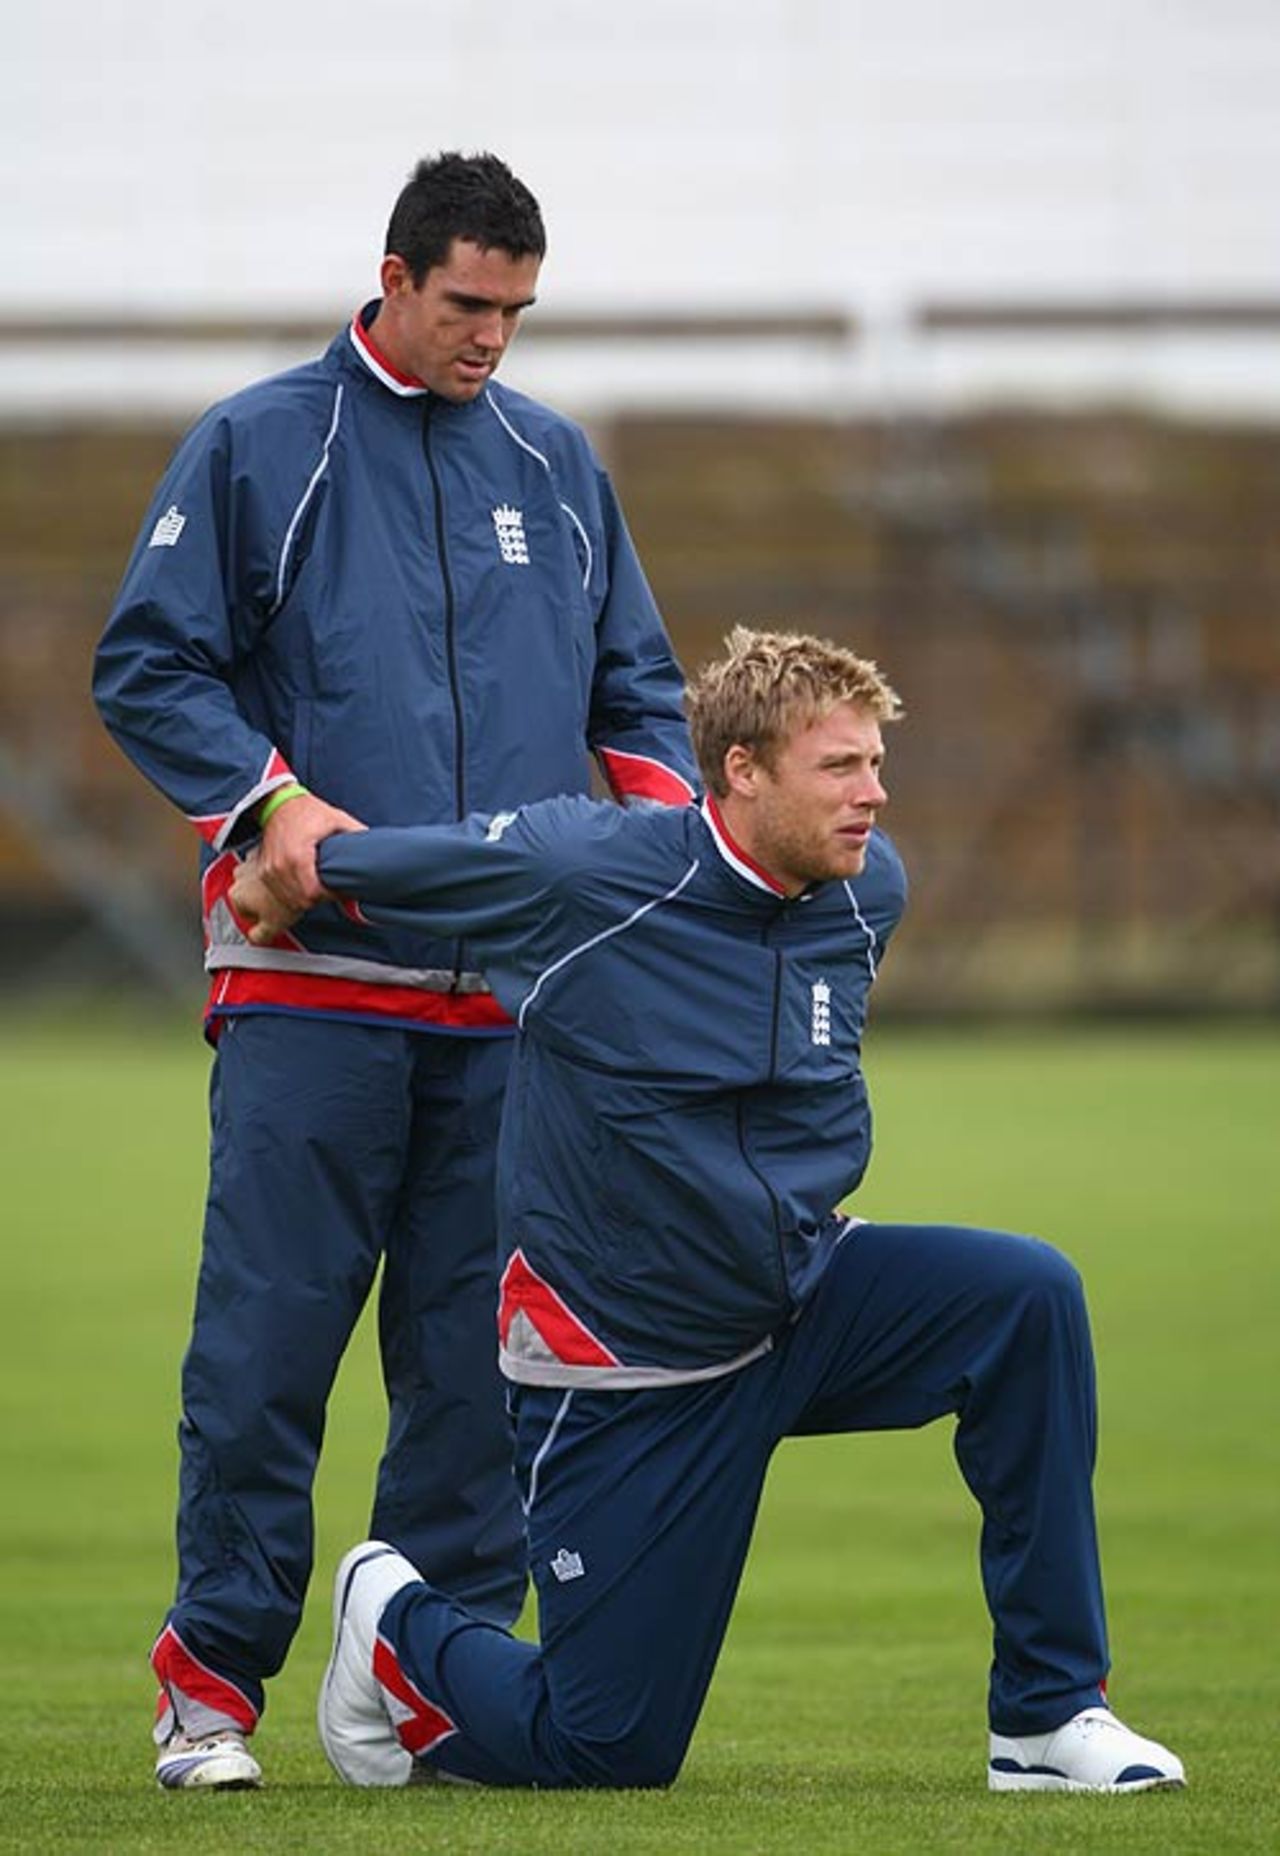 Kevin Pietersen helps Andrew Flintoff stretch some muscles, Cape Town, September 11, 2007